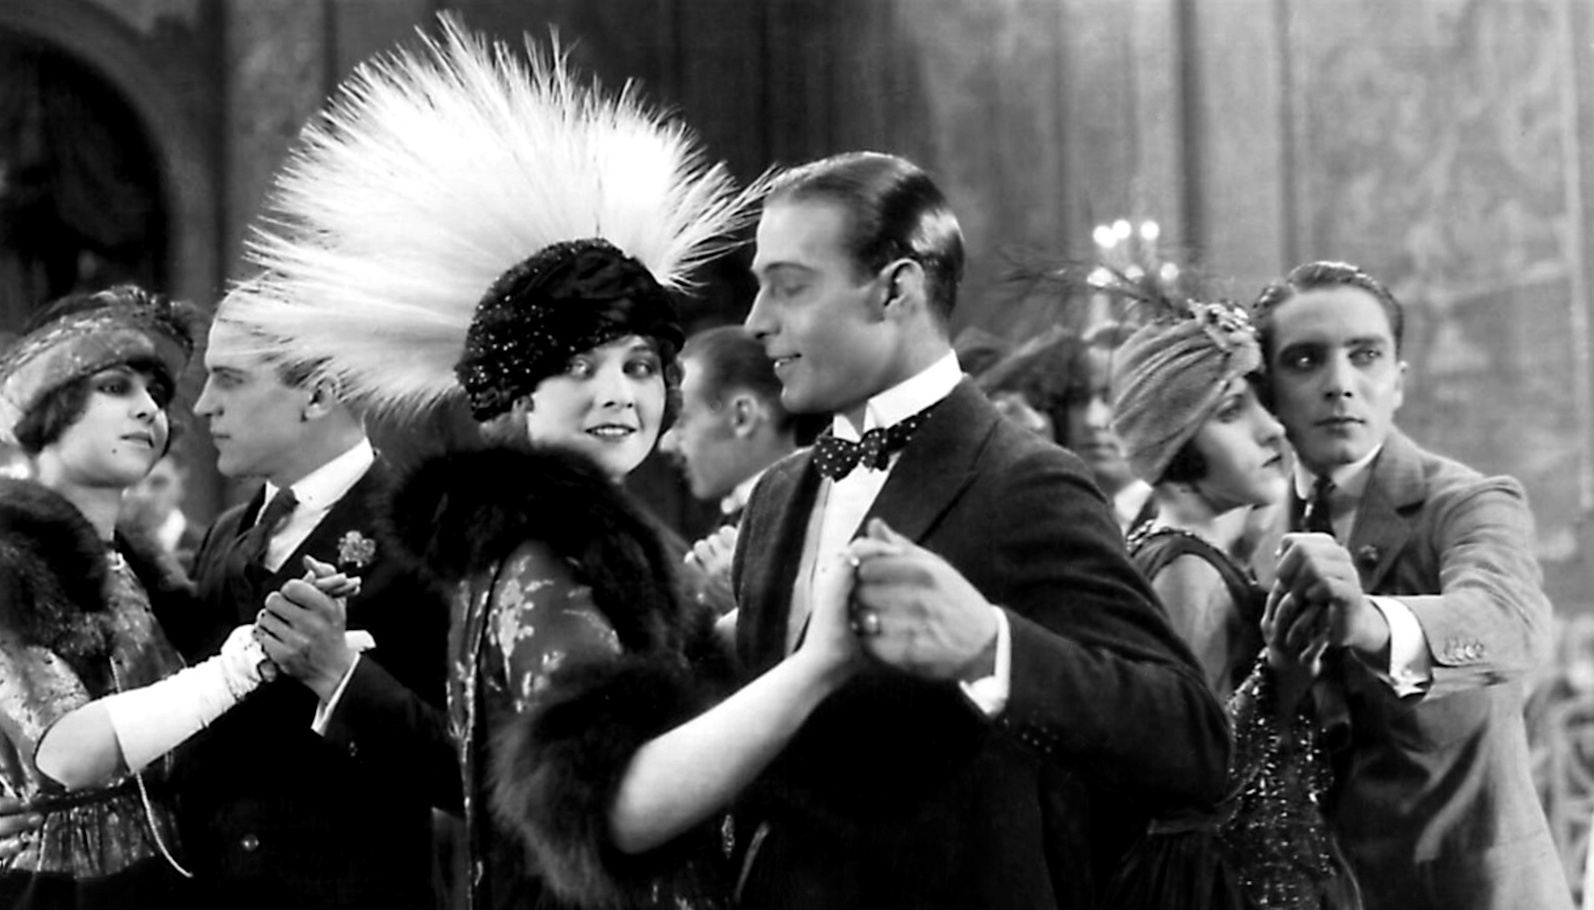 A black and white image of a man in a tuxedo dancing with a woman in a high white feathered peacock headdress